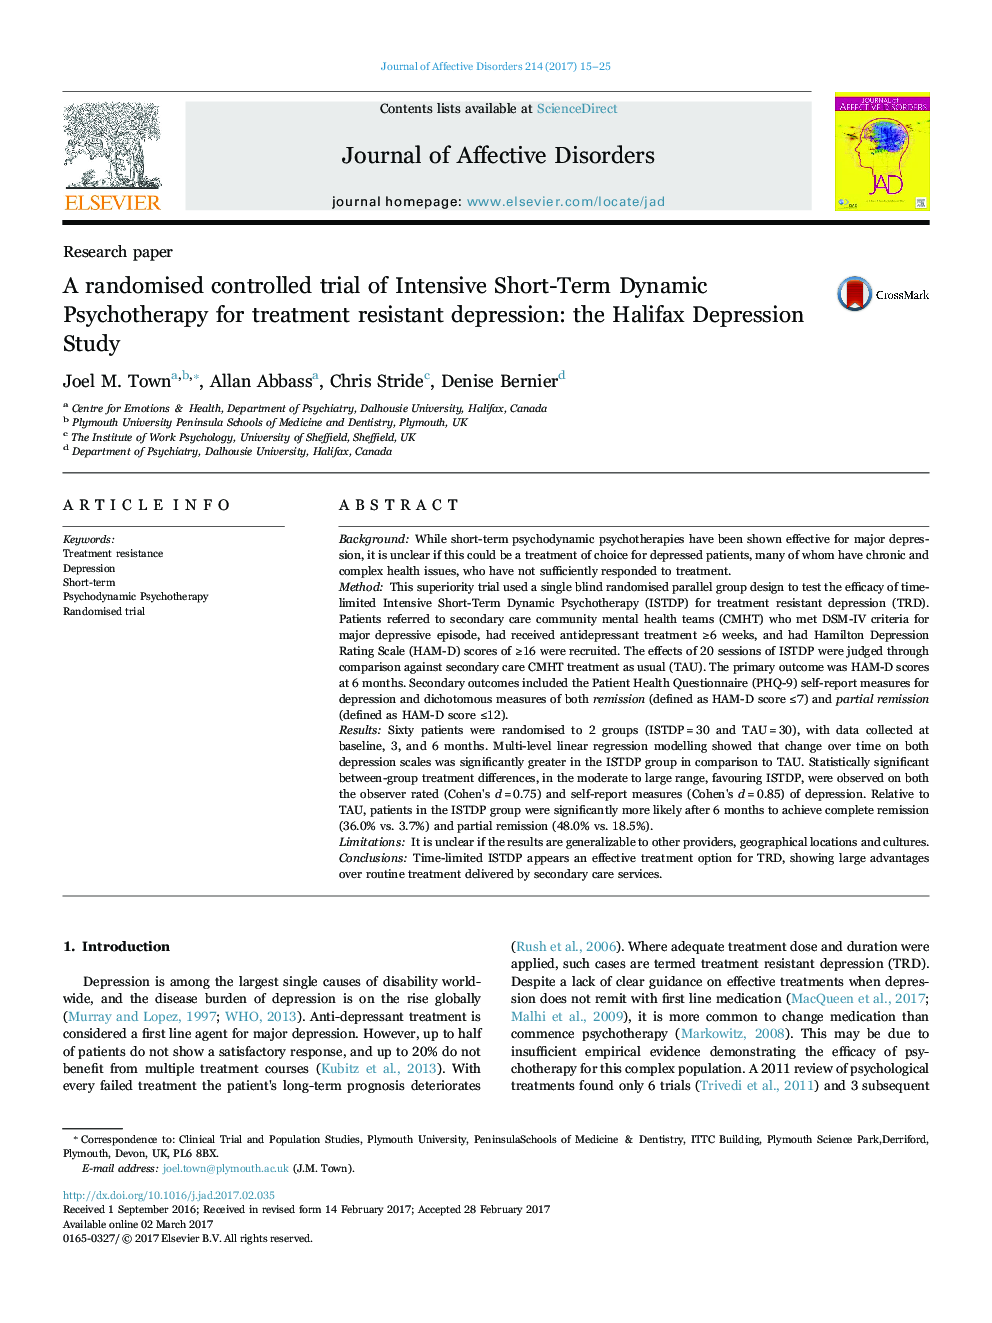 Research paperA randomised controlled trial of Intensive Short-Term Dynamic Psychotherapy for treatment resistant depression: the Halifax Depression Study